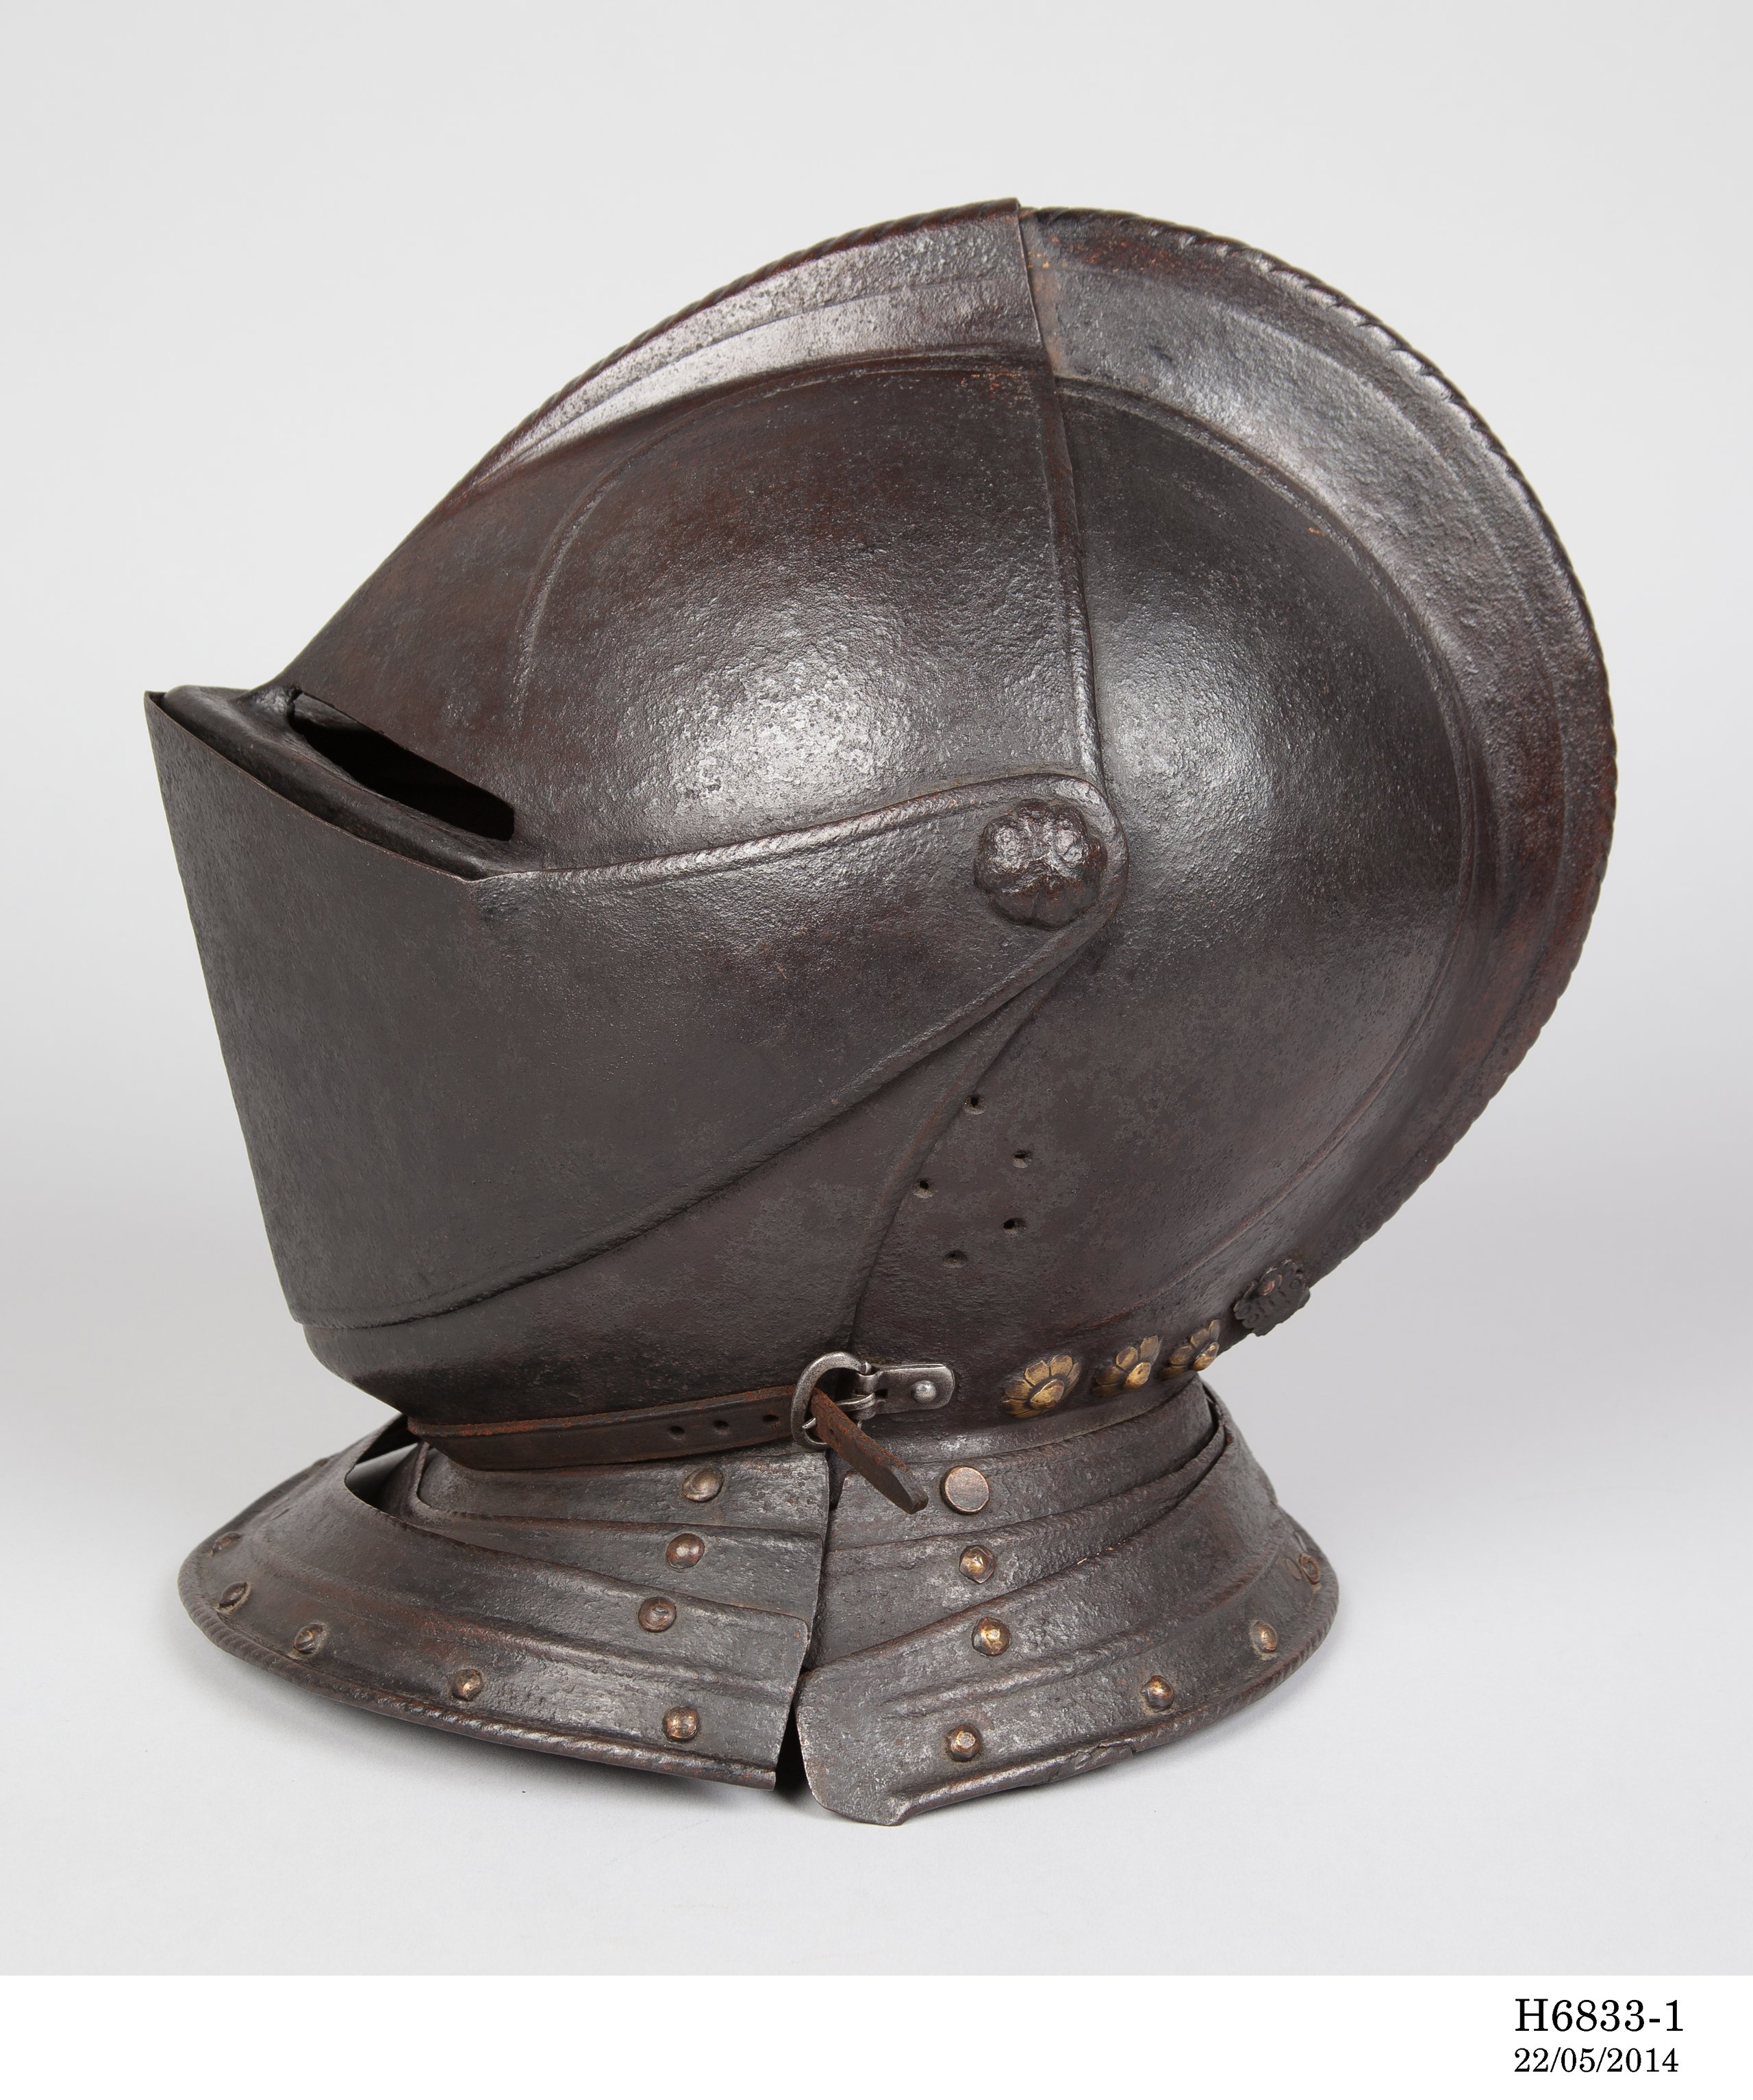 Helmet from suit of armour